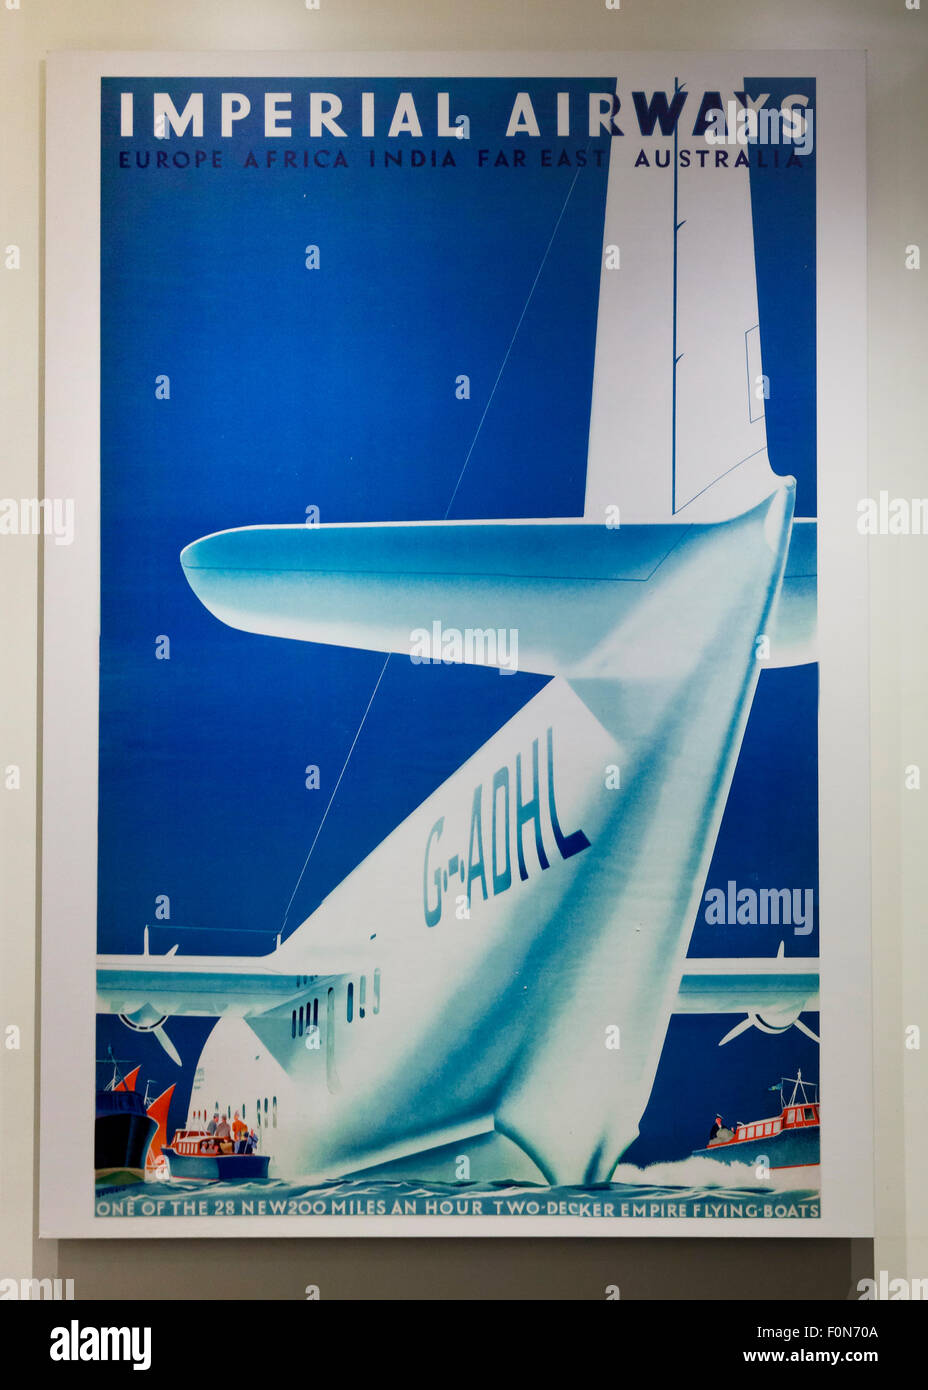 Imperial Airways advertisement poster featuring an Empire flying boat, circa 1930s Stock Photo